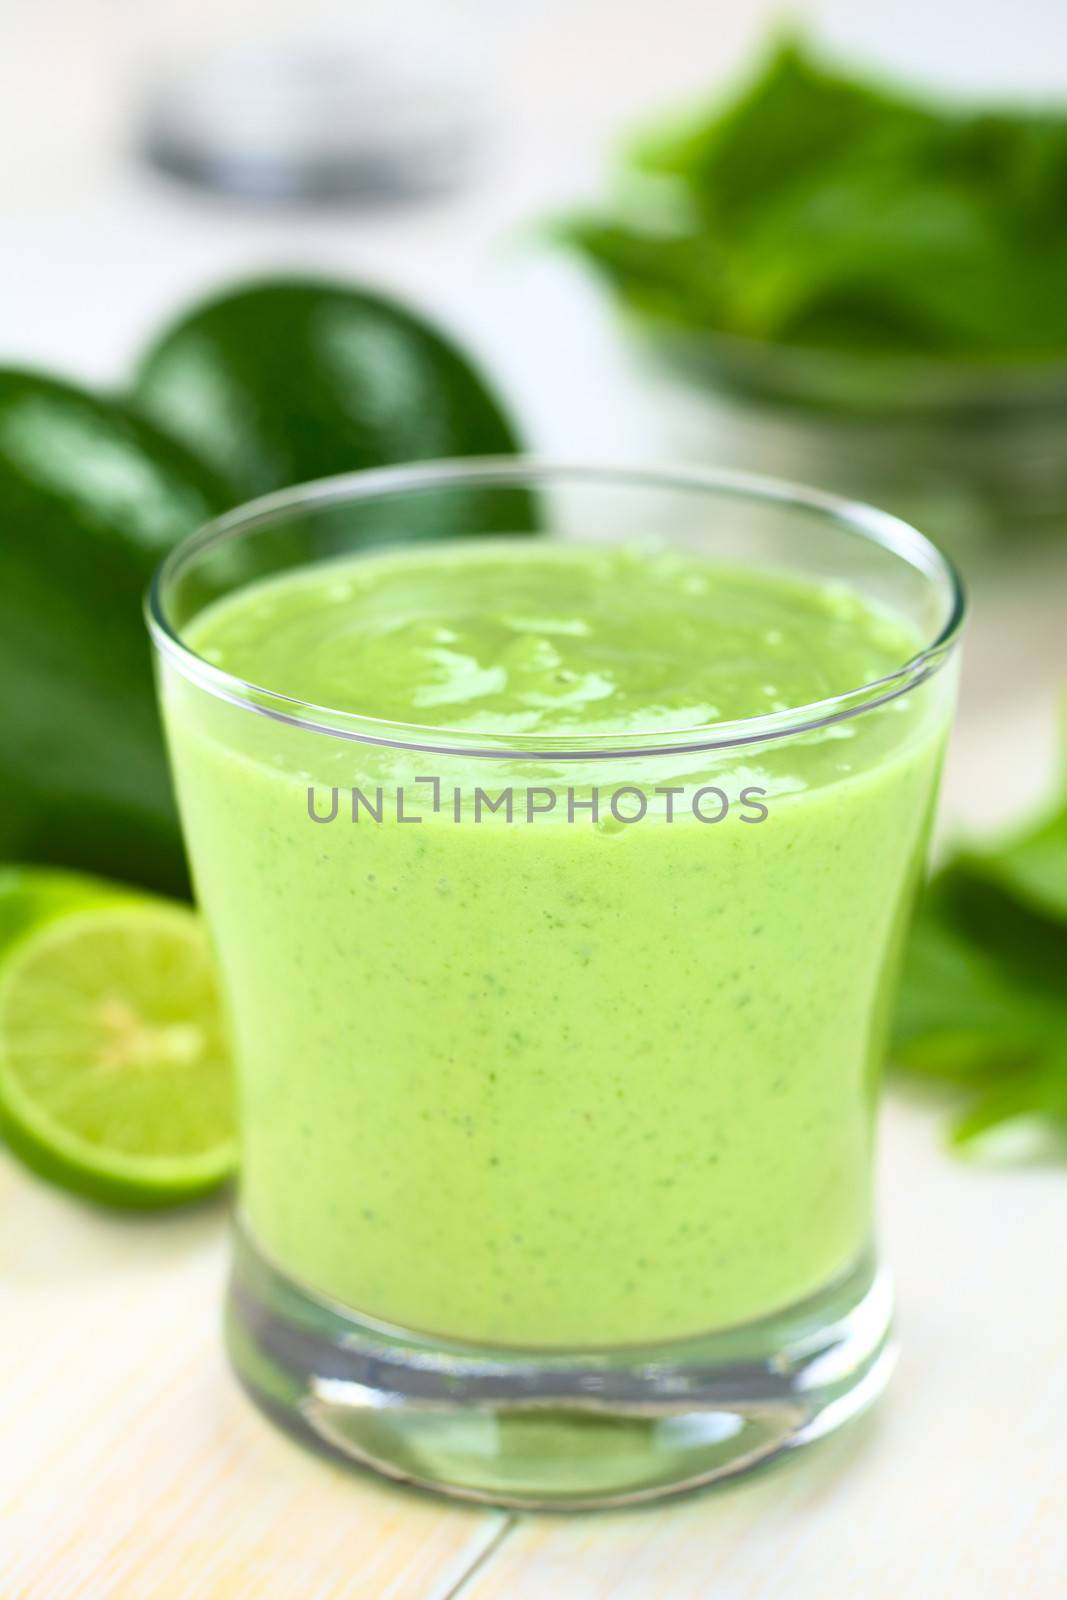 Healthy refreshing green smoothie made of fresh avocado, spinach, lime and yoghurt in a glass on bright wood (Selective Focus, Focus on the front of the glass rim)